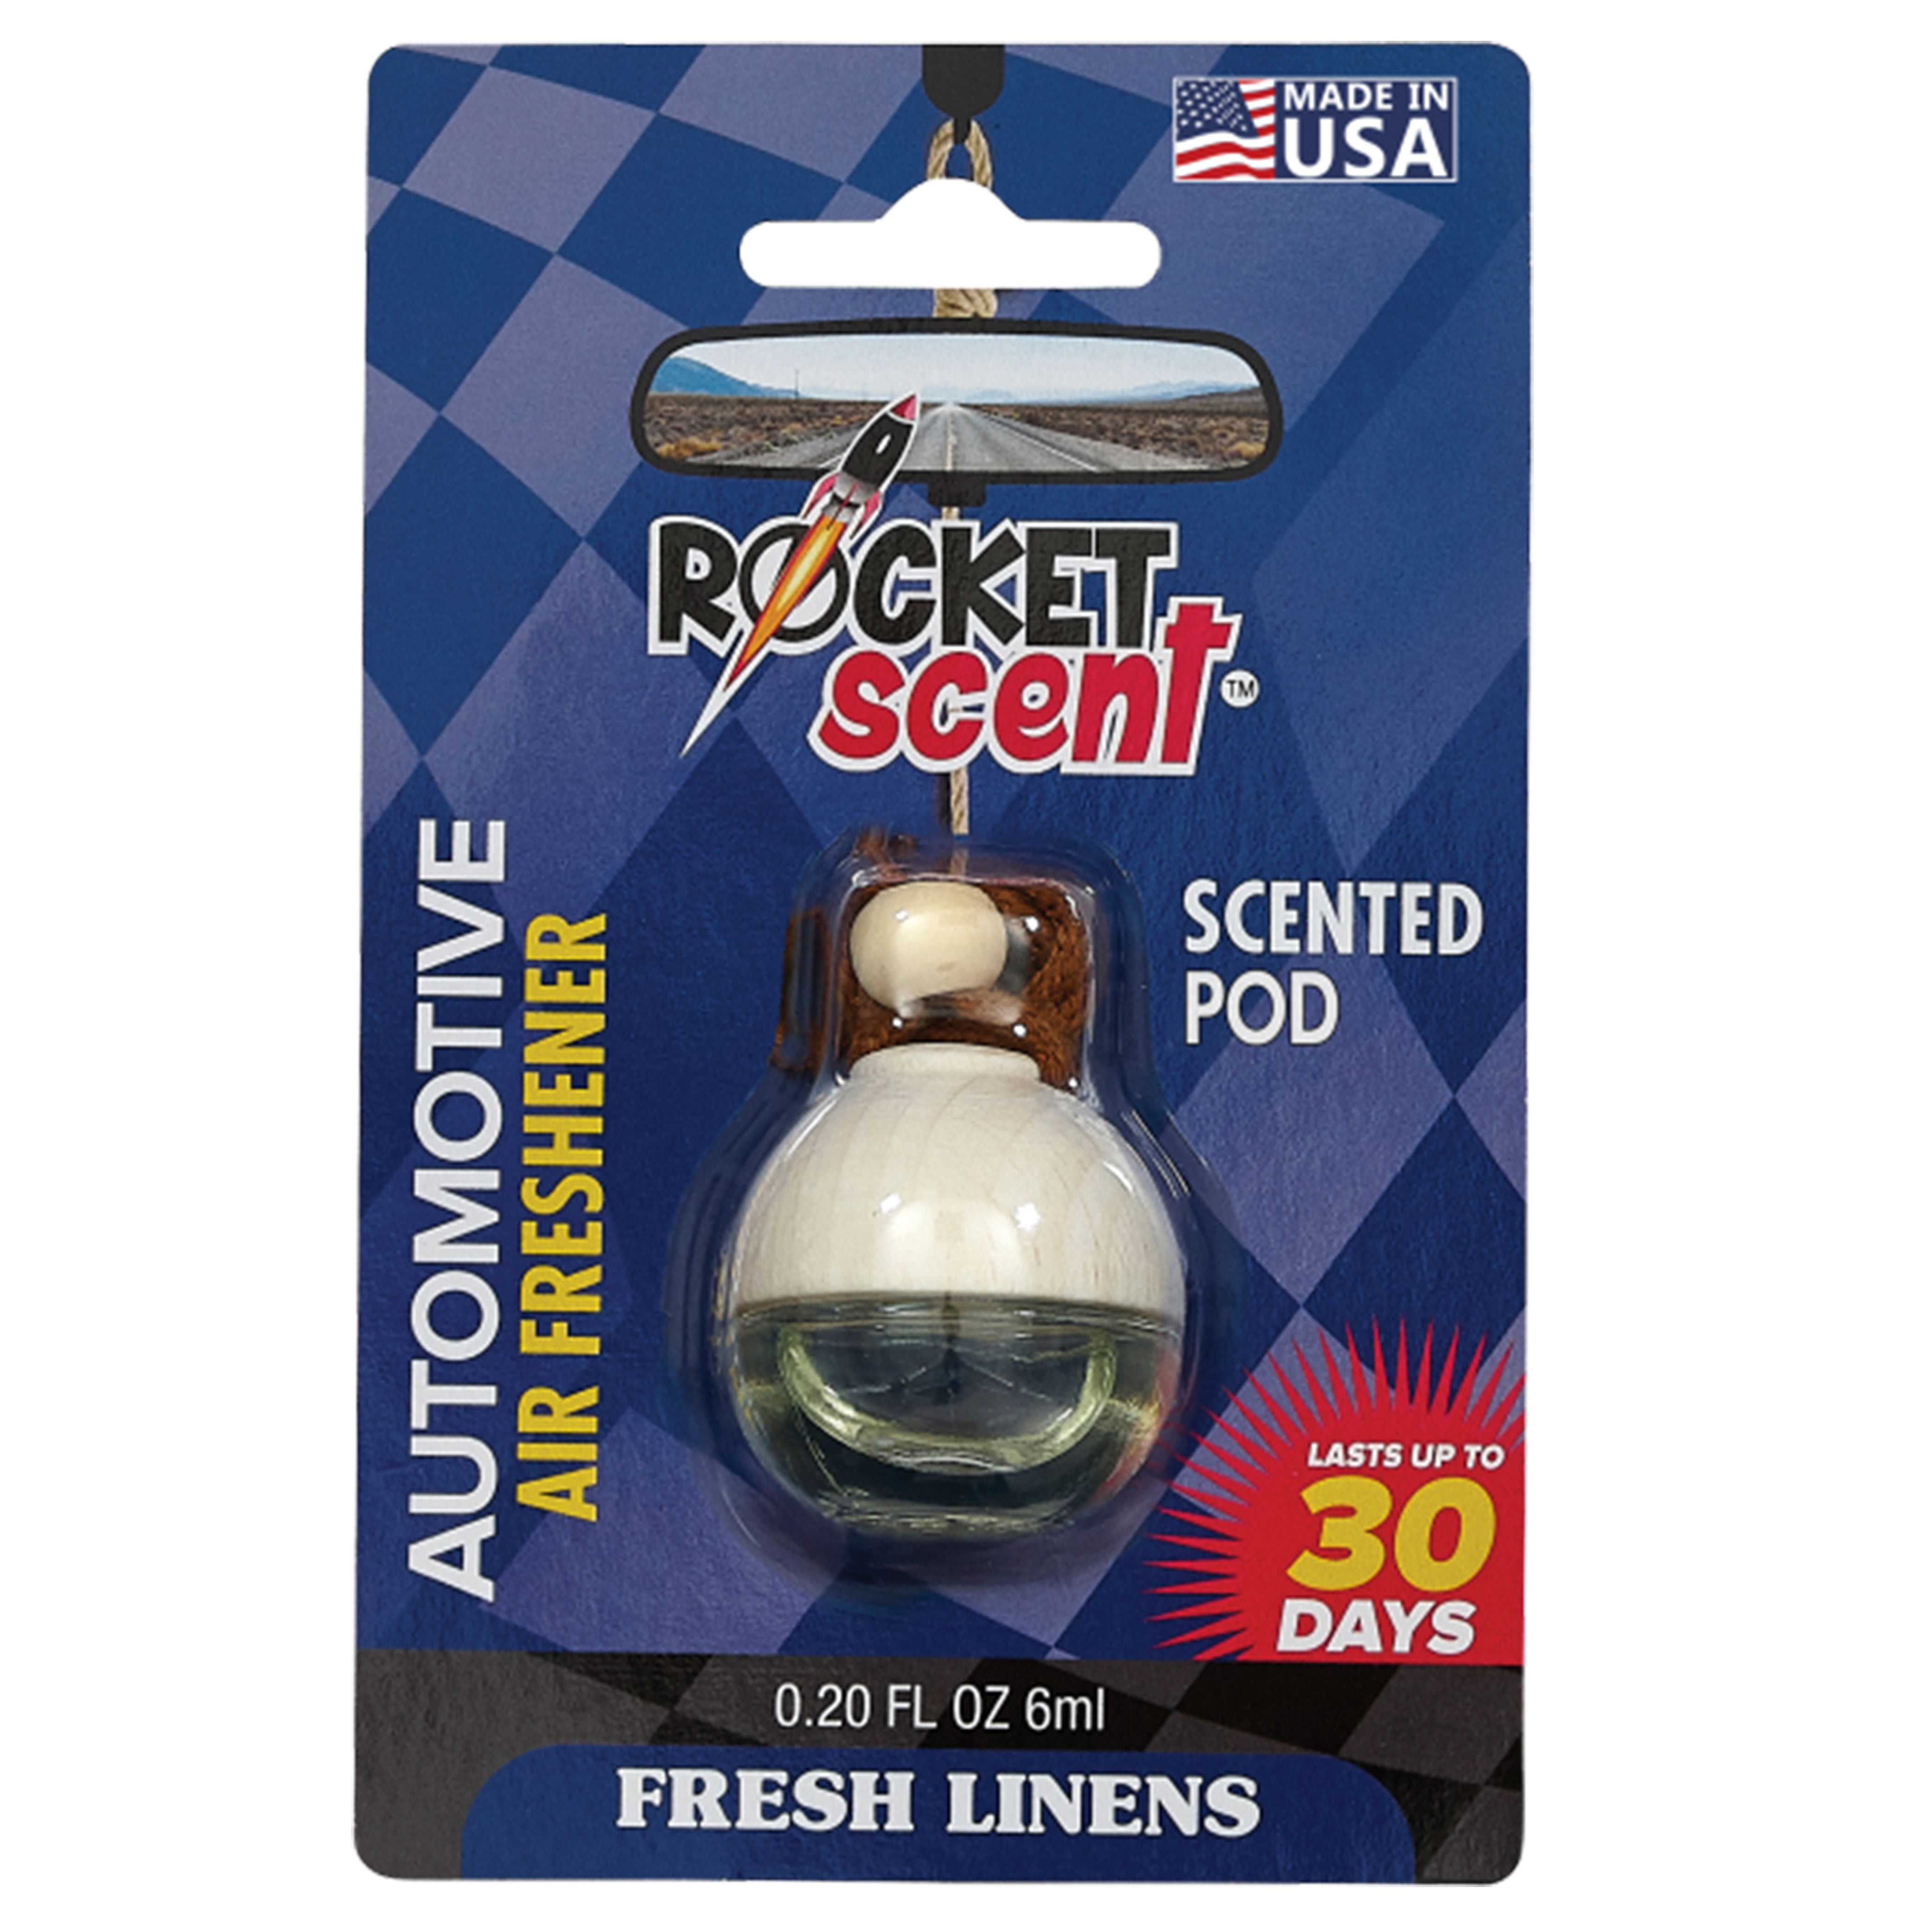 ROCKET SCENT :: Blister Packs :: New Car Scent Rocket Scent Hanging Pod -  Home Fragrance Products For Wholesale